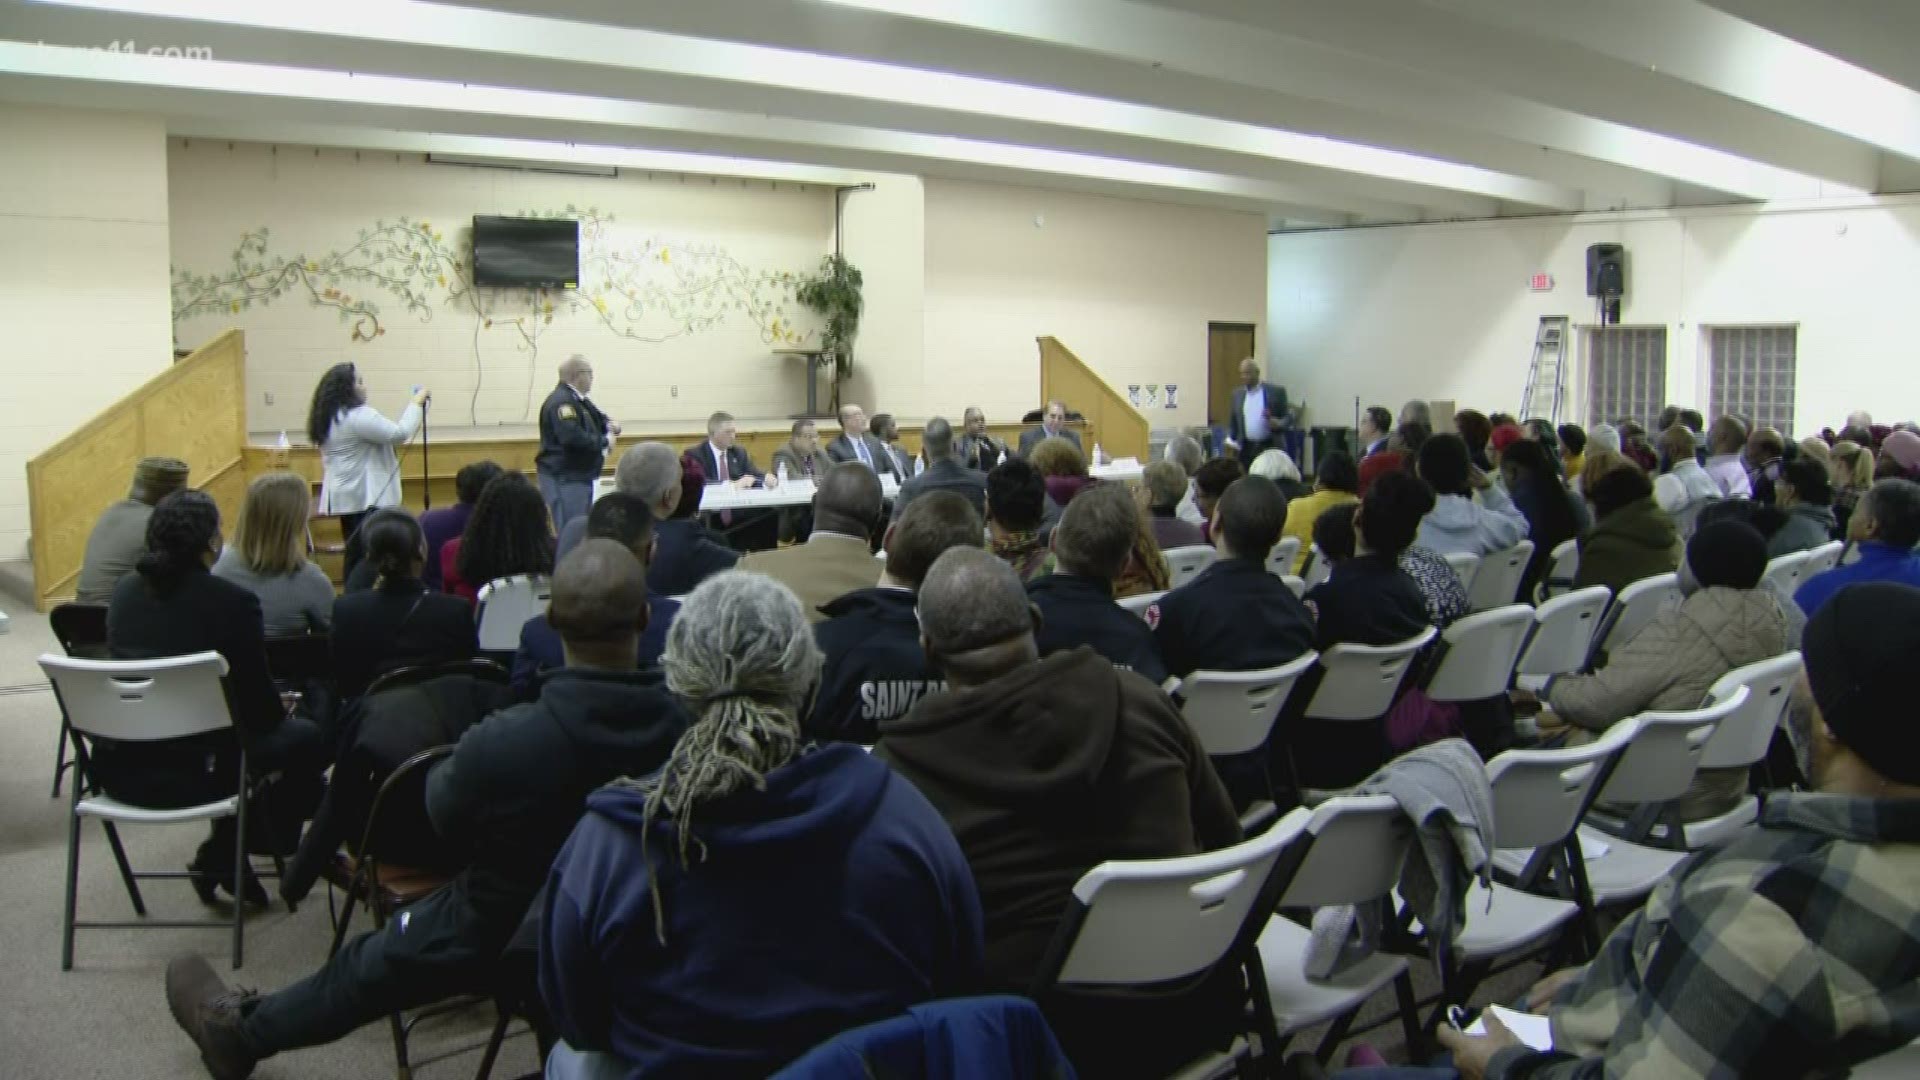 On Wednesday evening, top leaders from St. Paul and the state had a candid conversation with the community about the violence.